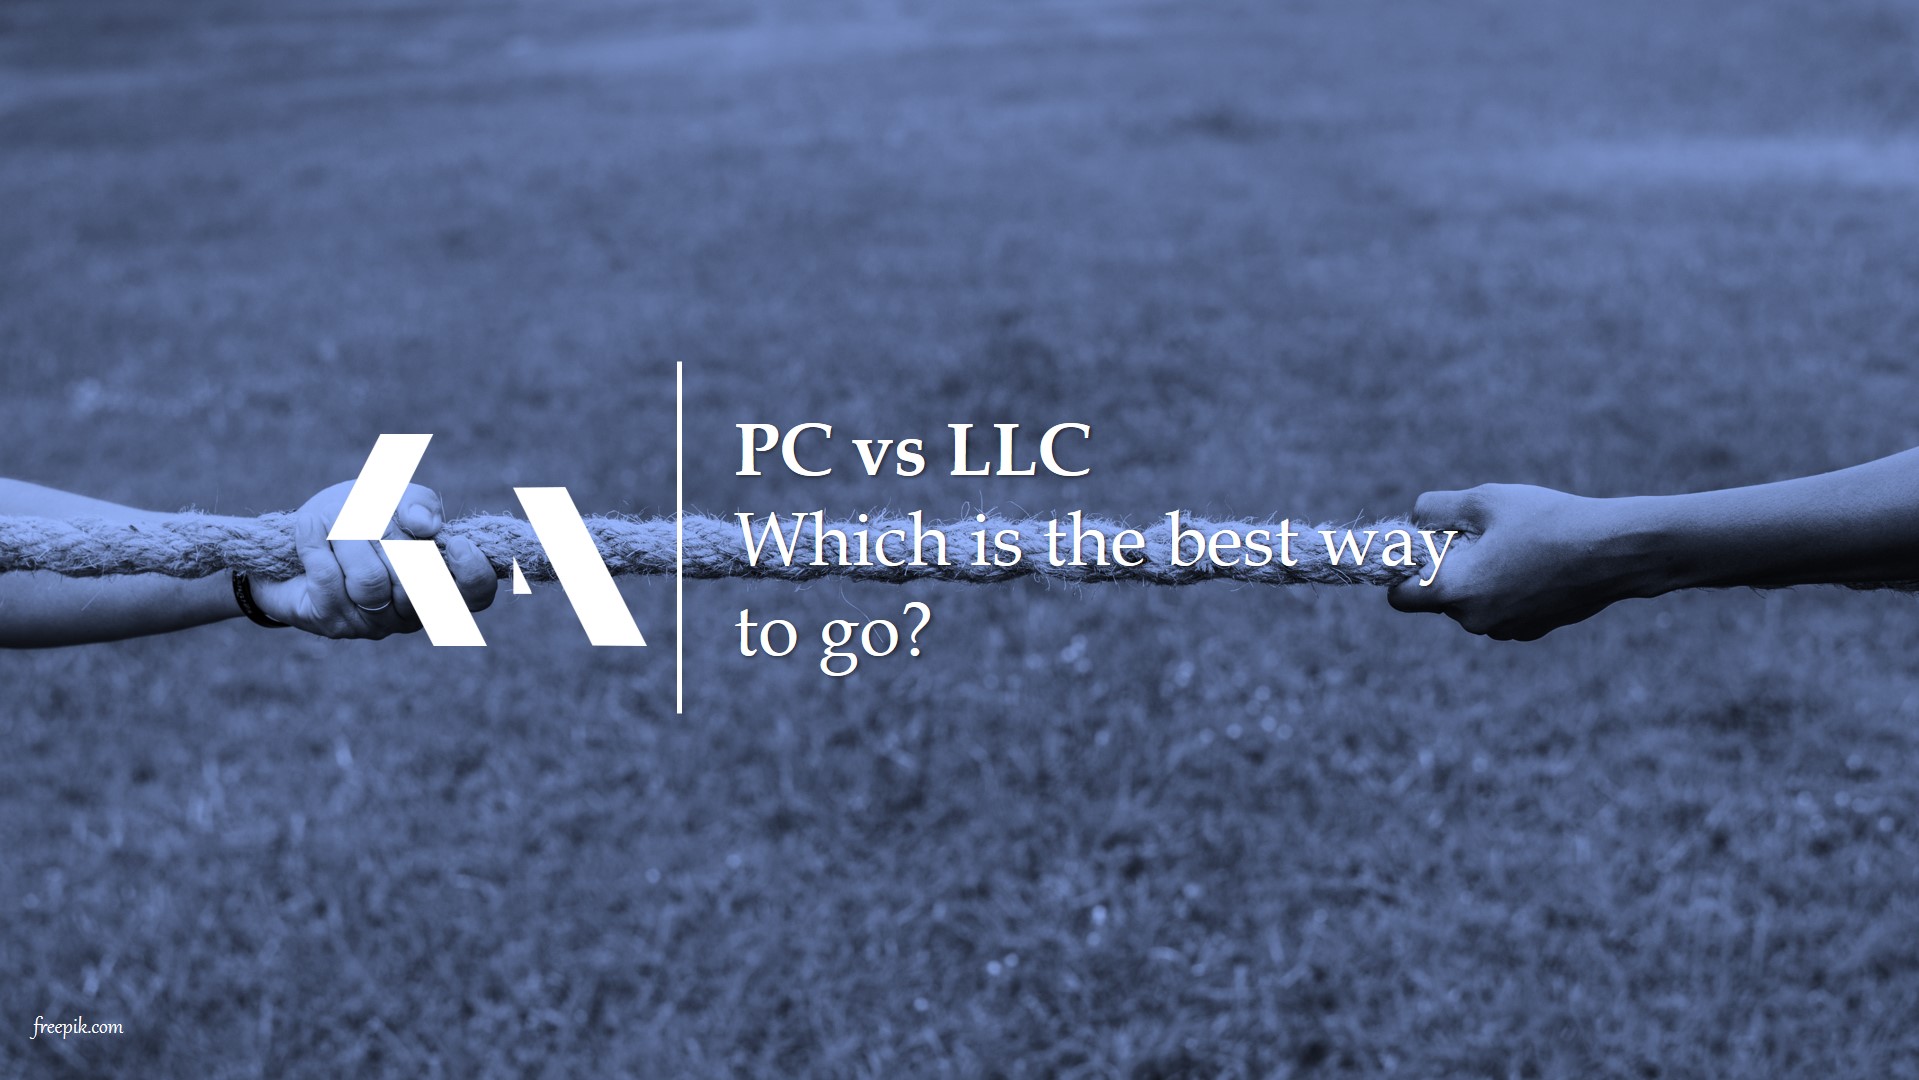 Private Company vs Limited Liability Company: Which is the best way to go?